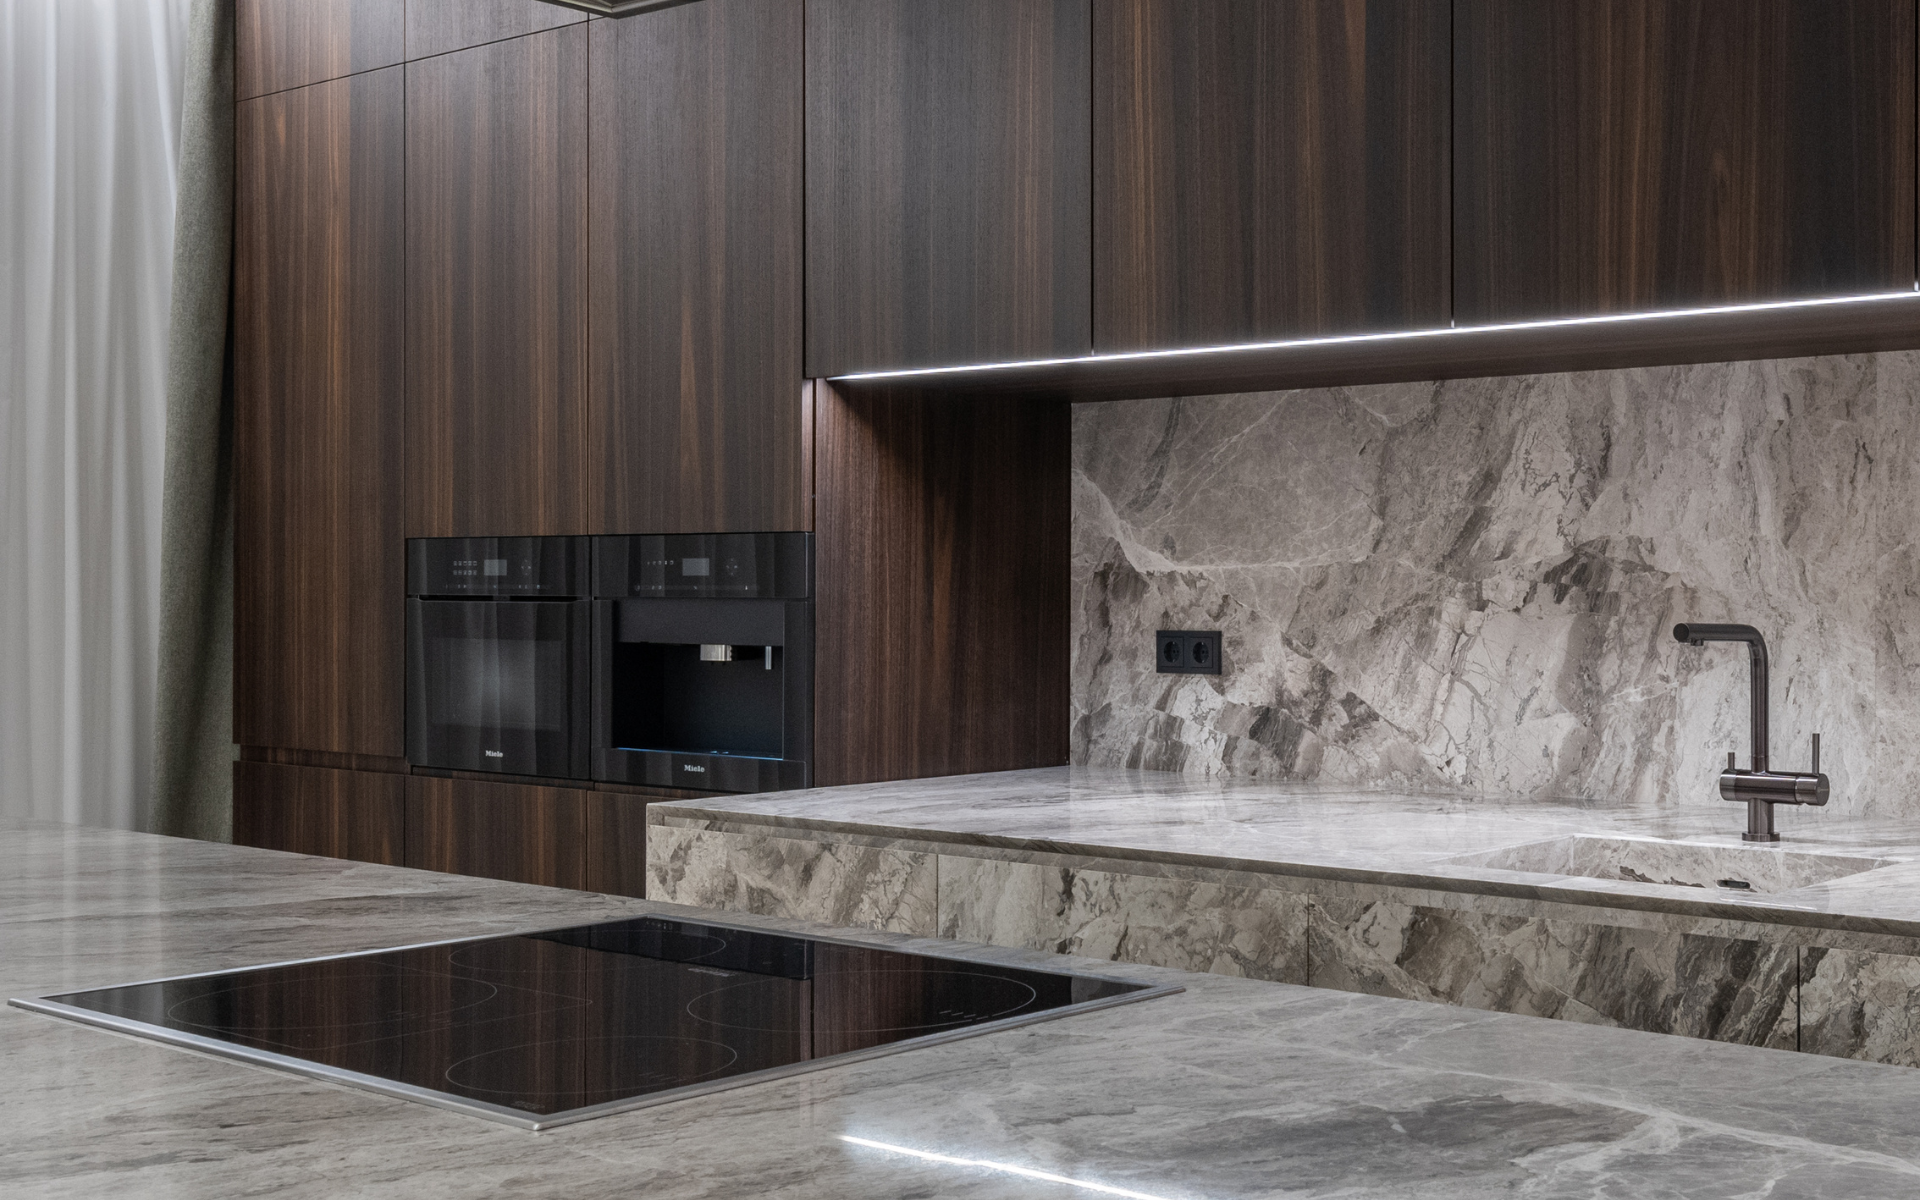 Luxurious kitchen with marble countertops